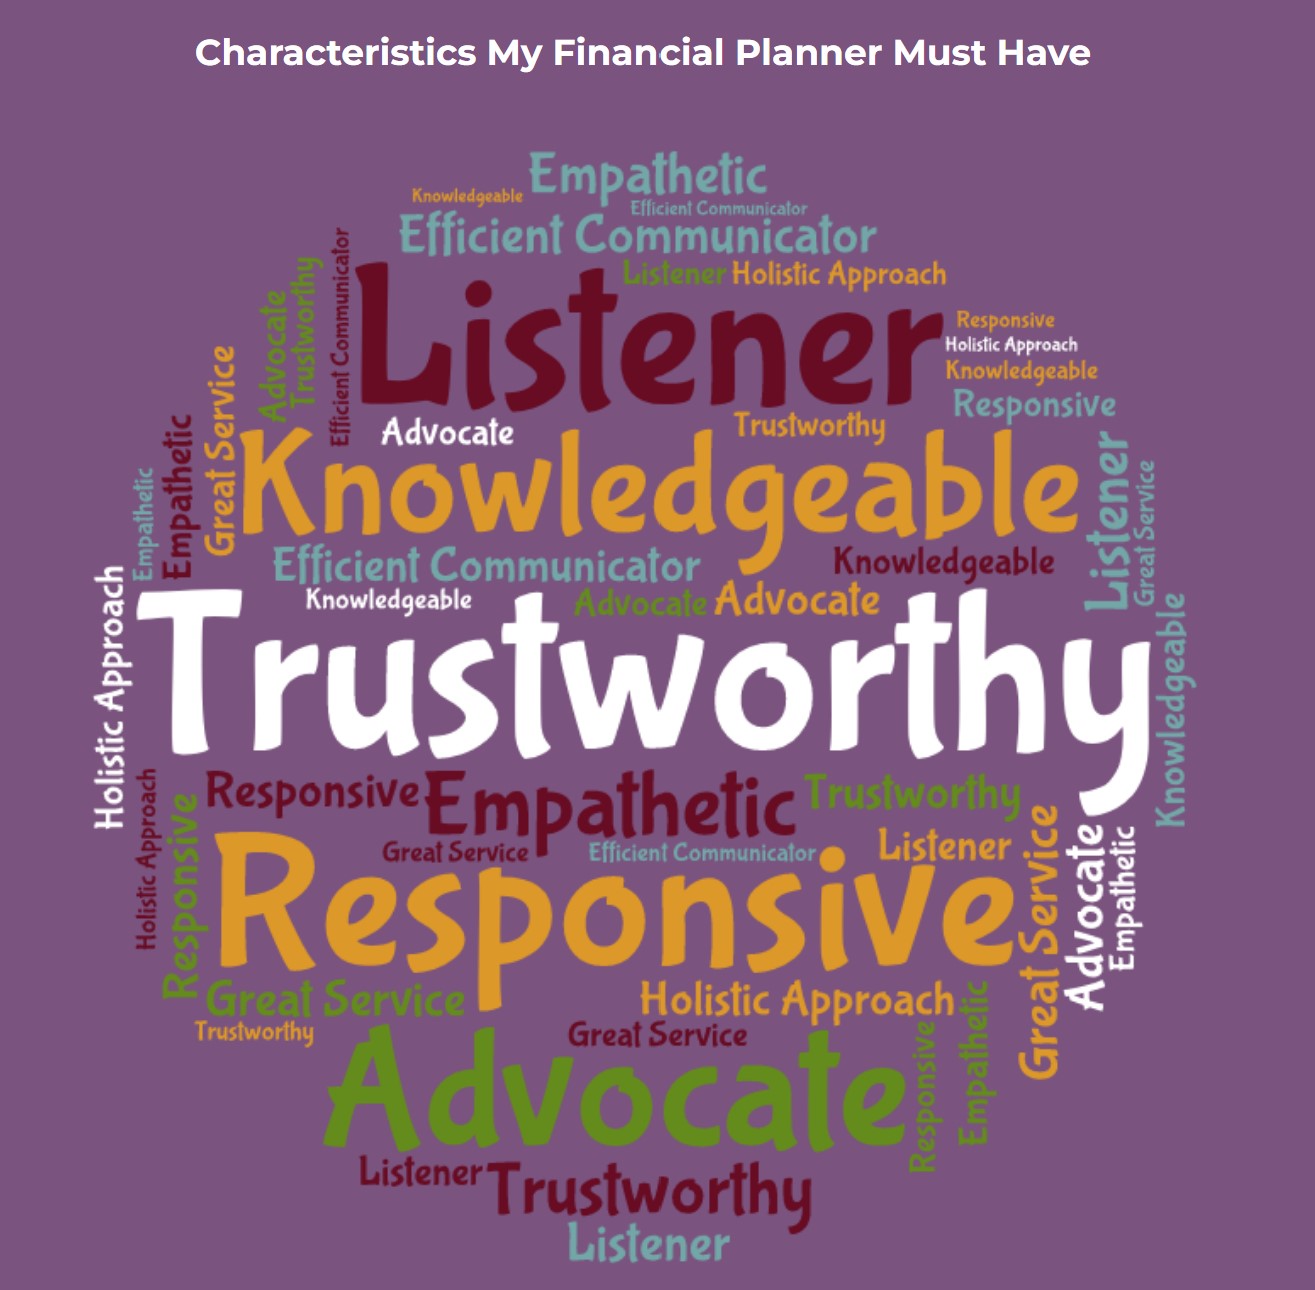 Characteristics My financial Planner Must Have